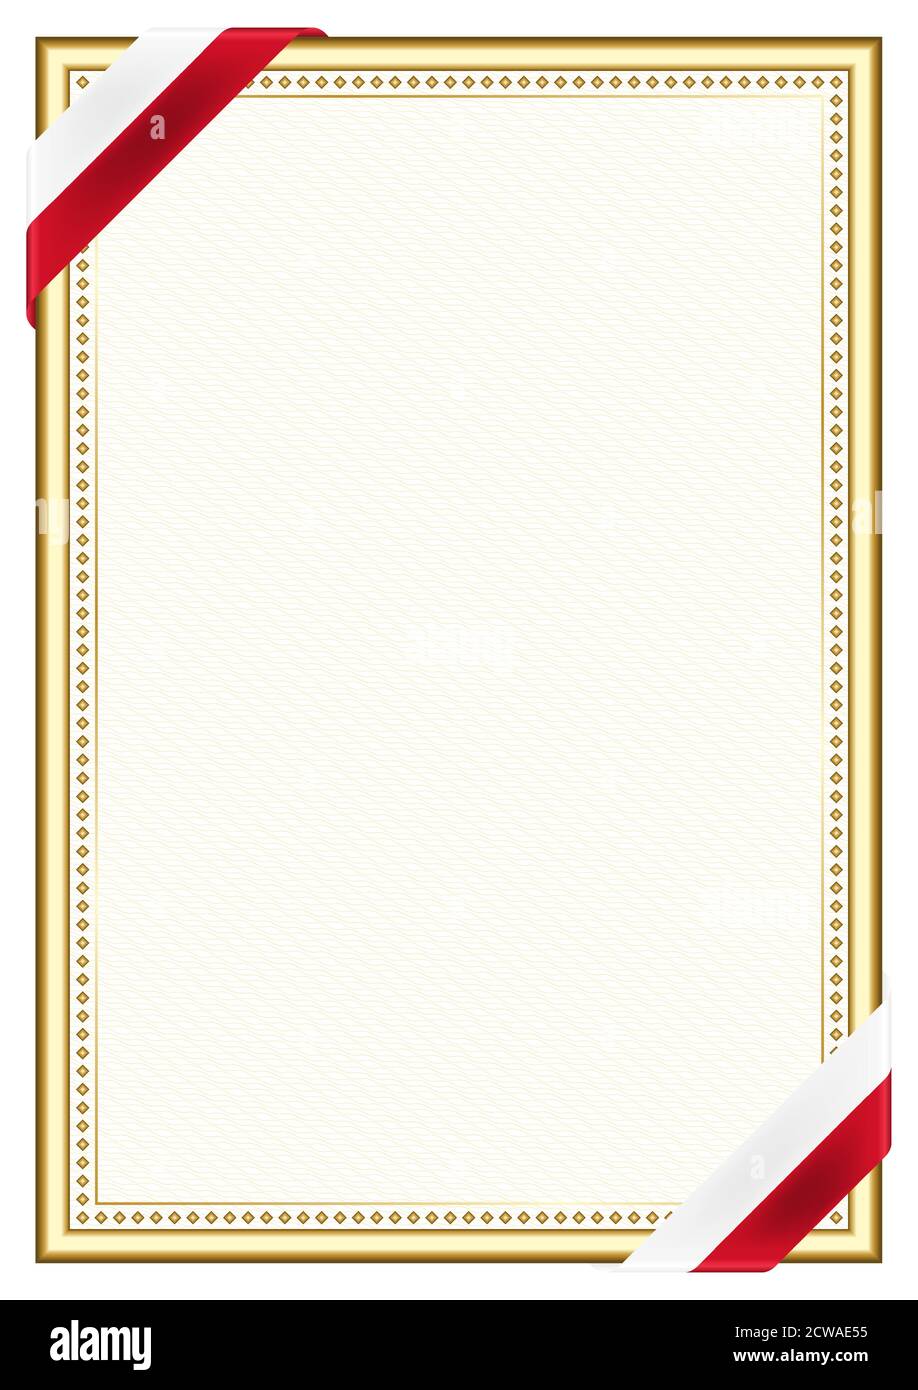 Vertical frame and border with Bahrain flag, template elements for your ...